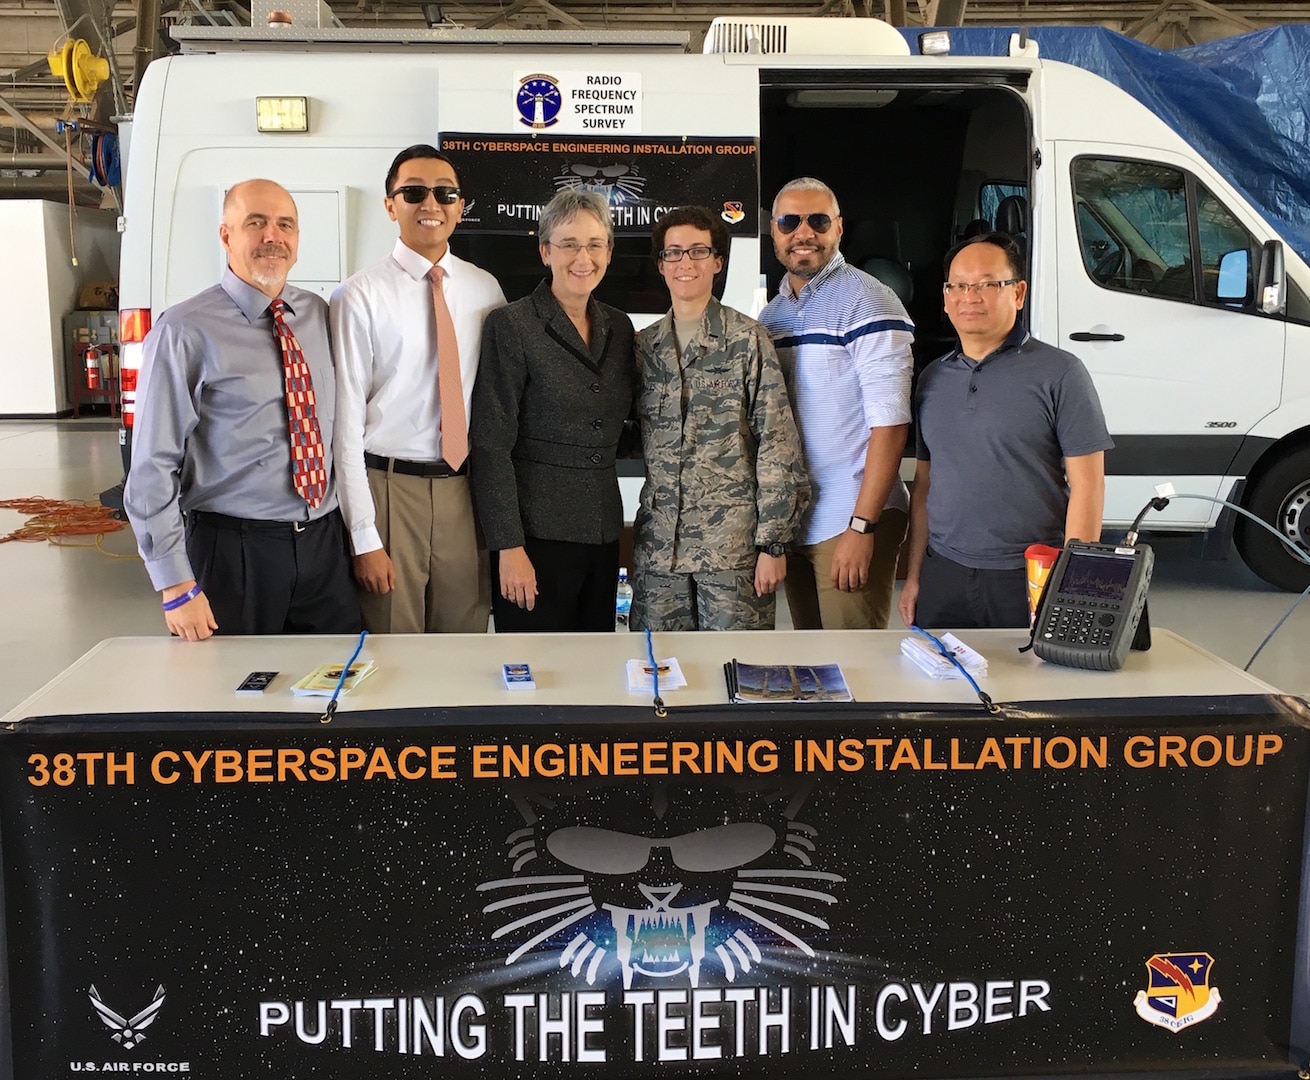 Secretary of the Air Force, Honorable Heather Wilson, poses with personnel from the 38th Cyberspace Engineering and Implementation Group during the Andrews AFB Airshow, Md, 15 Sep 2017.